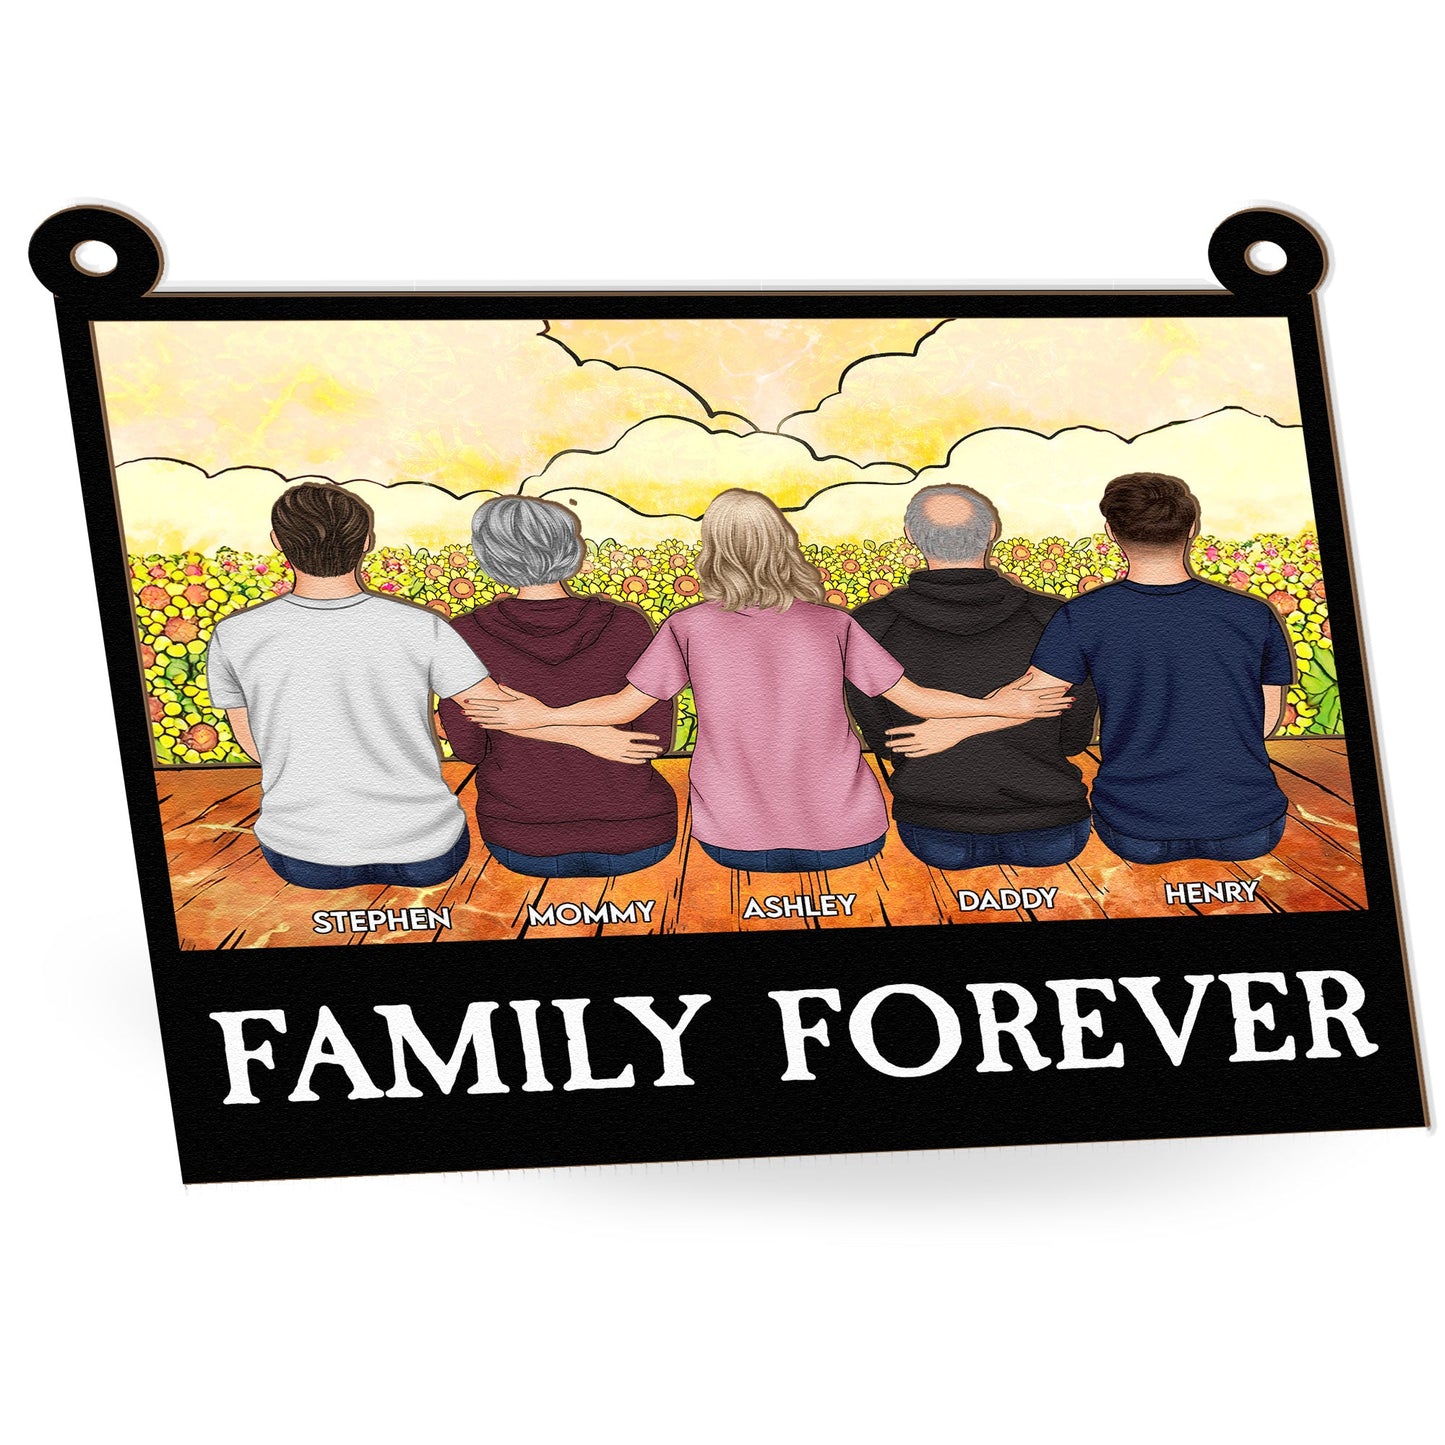 Family Forever - Personalized Window Hanging Suncatcher Ornament